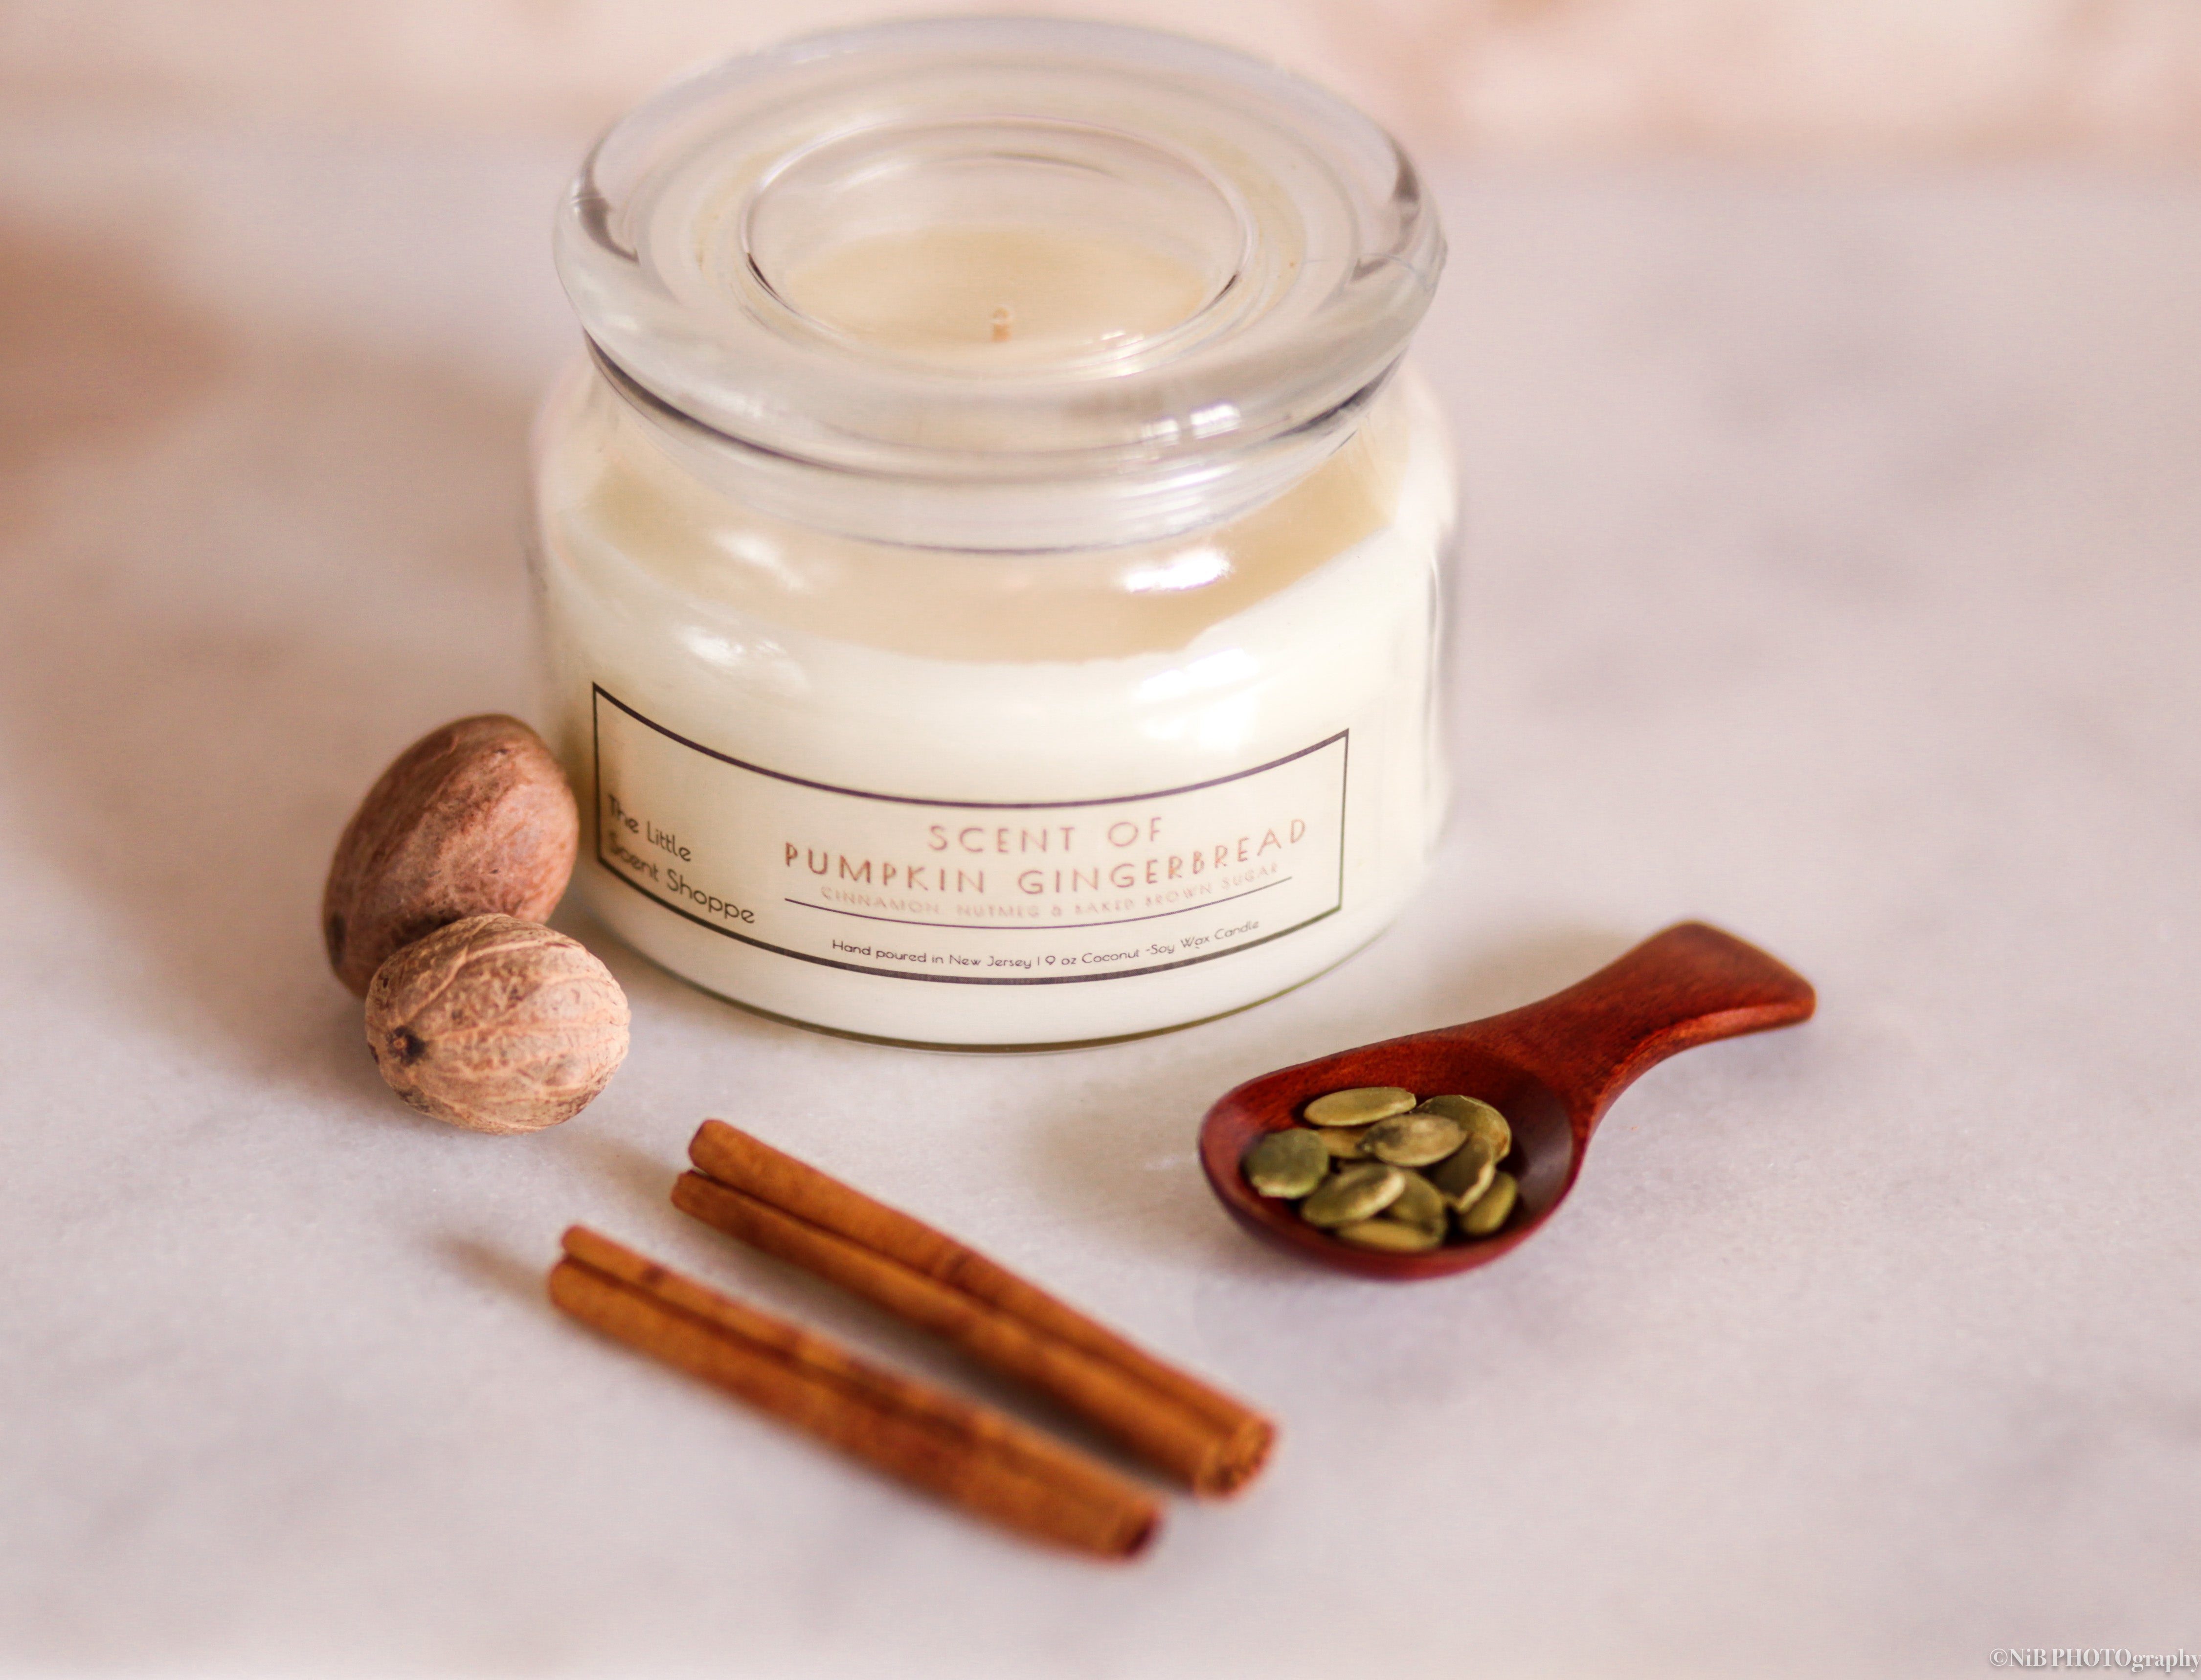 Scent of Pumpkin Gingerbread Candle